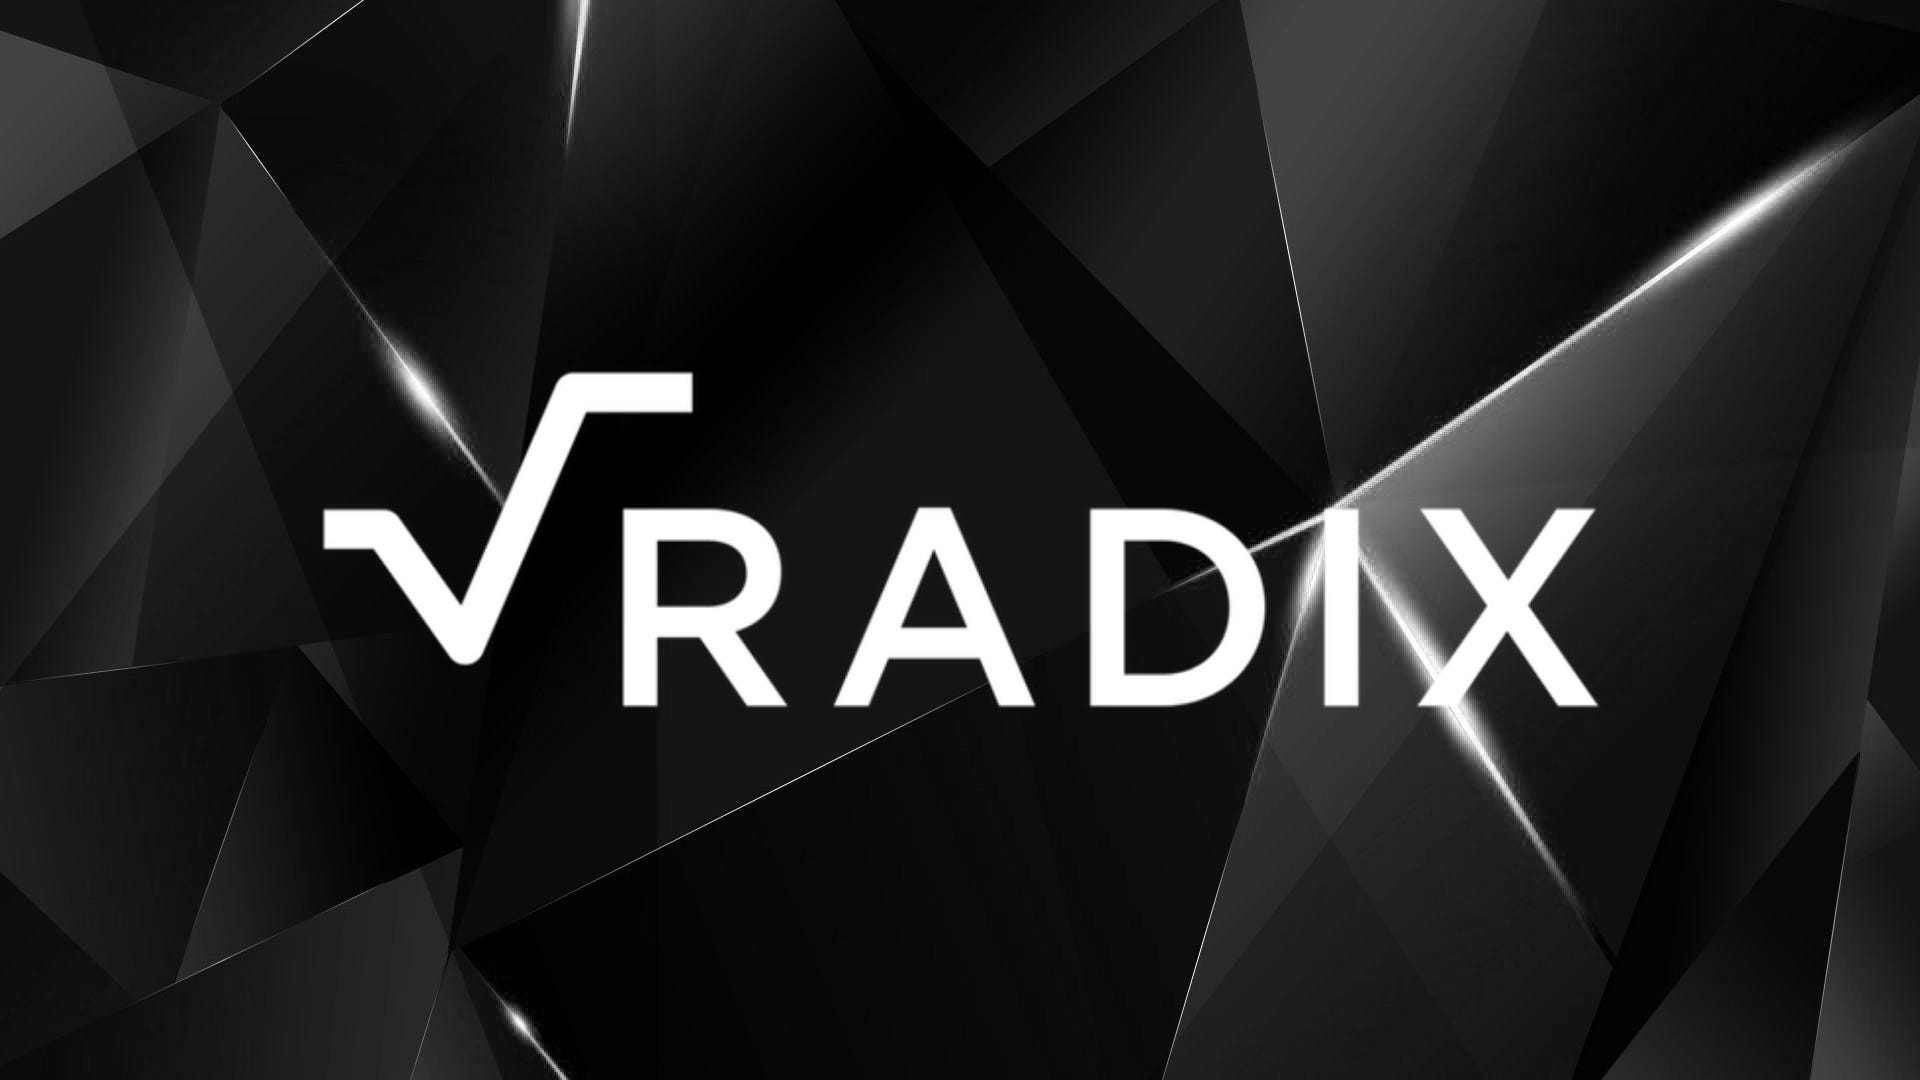 Radix: Detailed review on the project.